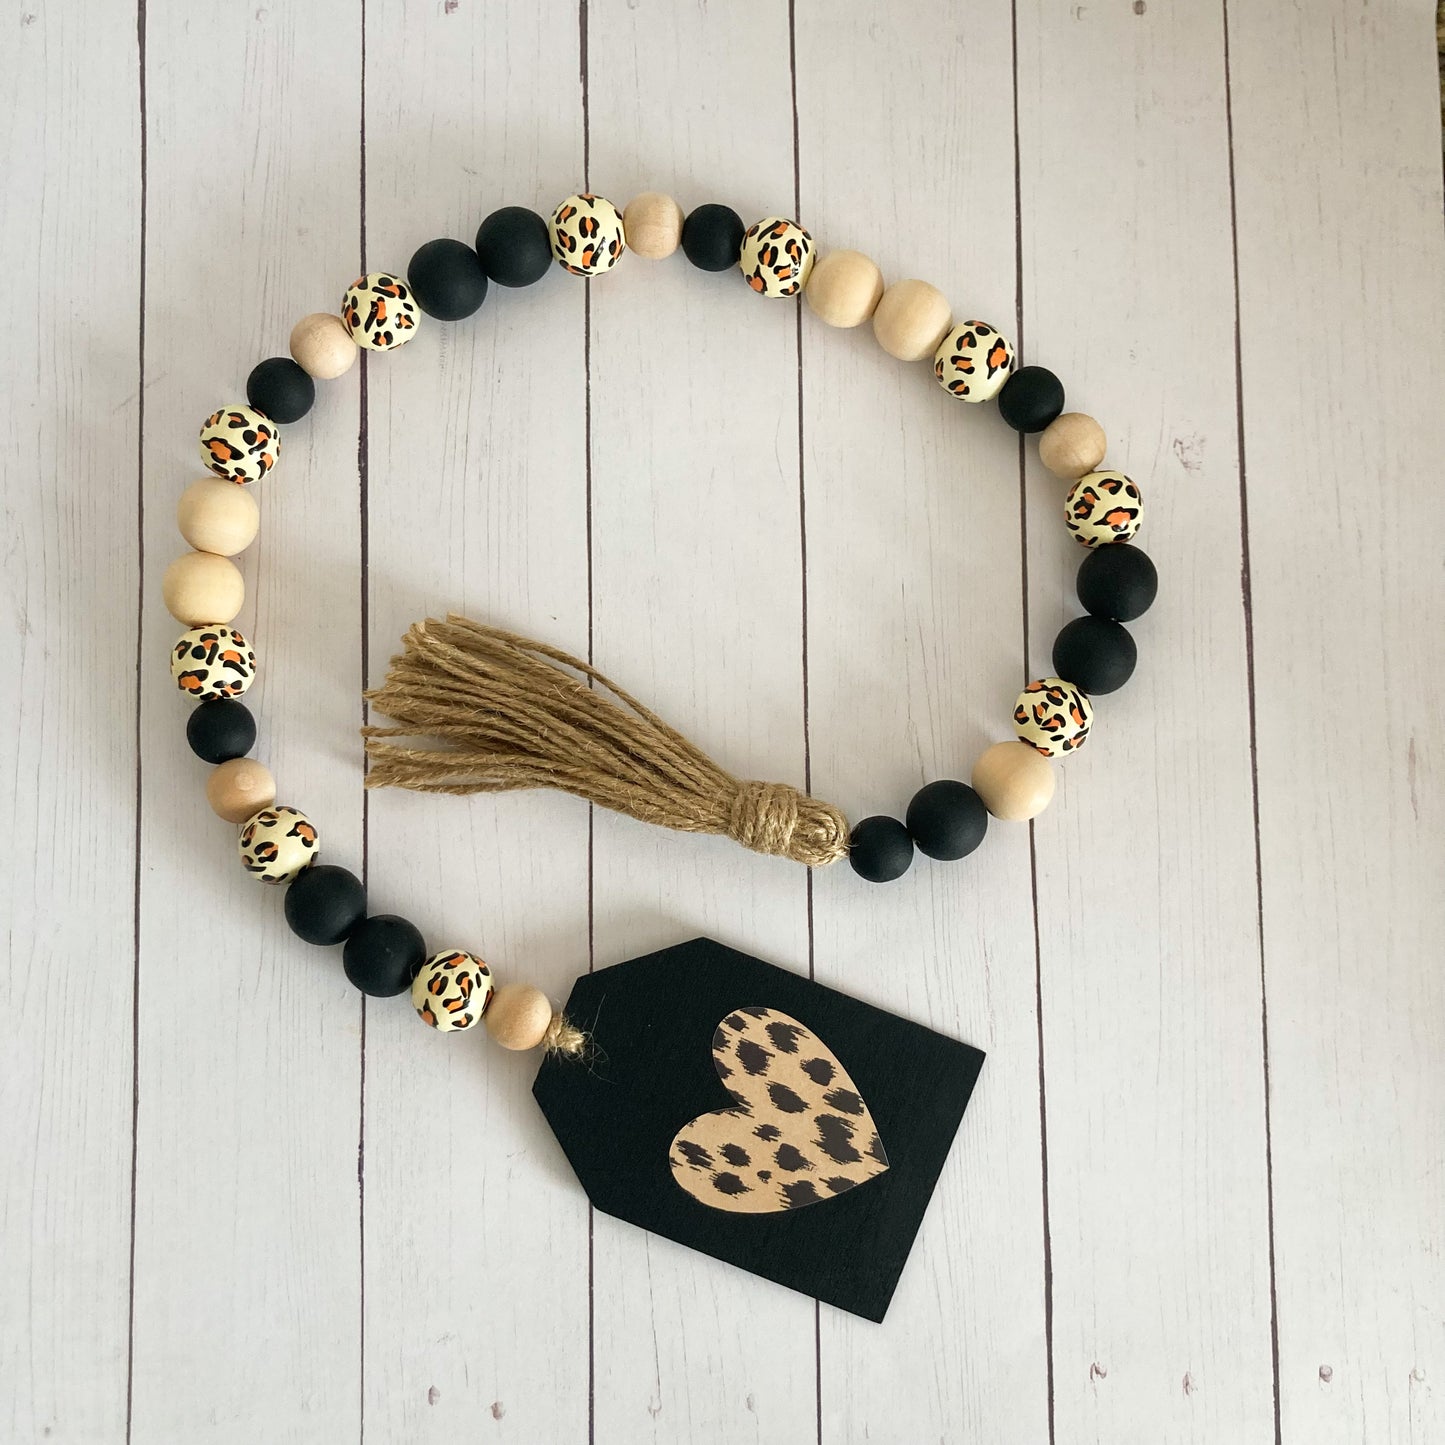 Leopard print wood bead garland with a variety of black natural and leopard printed beads jute twine tassel and black painted tag with leopard print heart 24 inches in total length